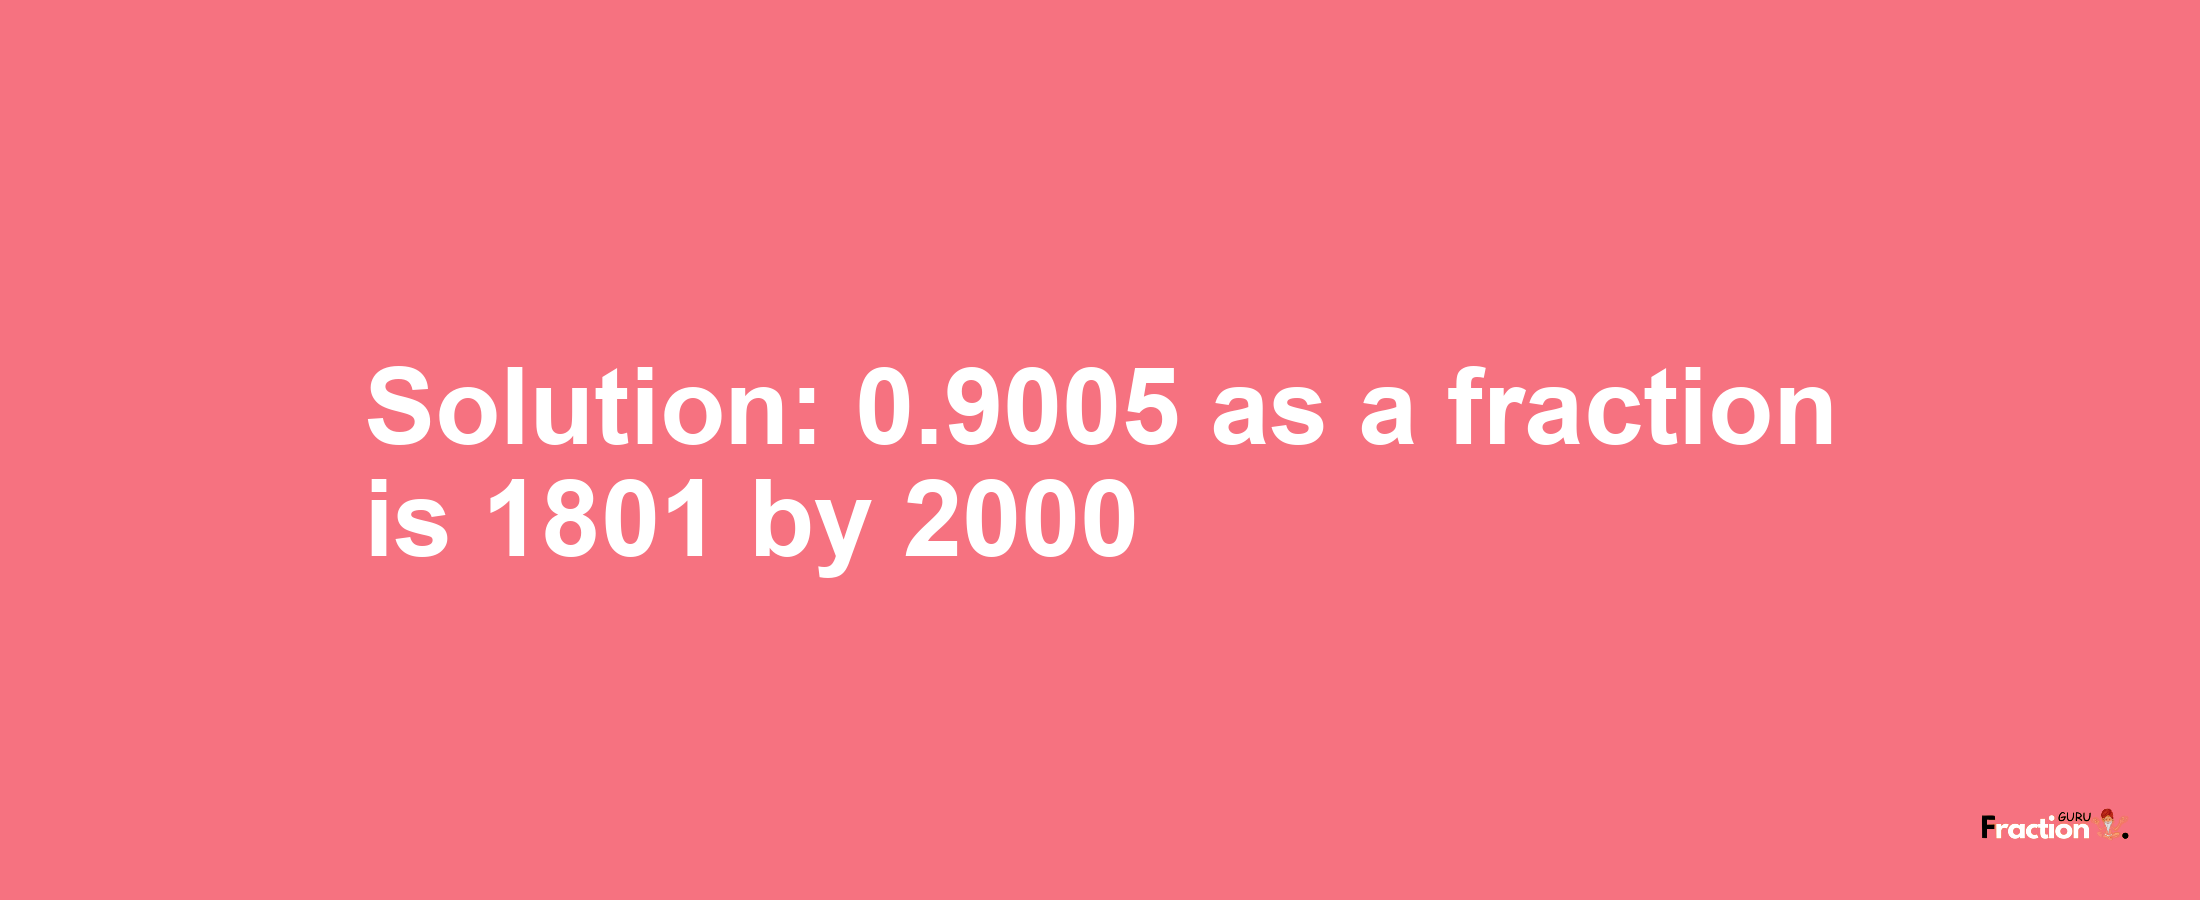 Solution:0.9005 as a fraction is 1801/2000